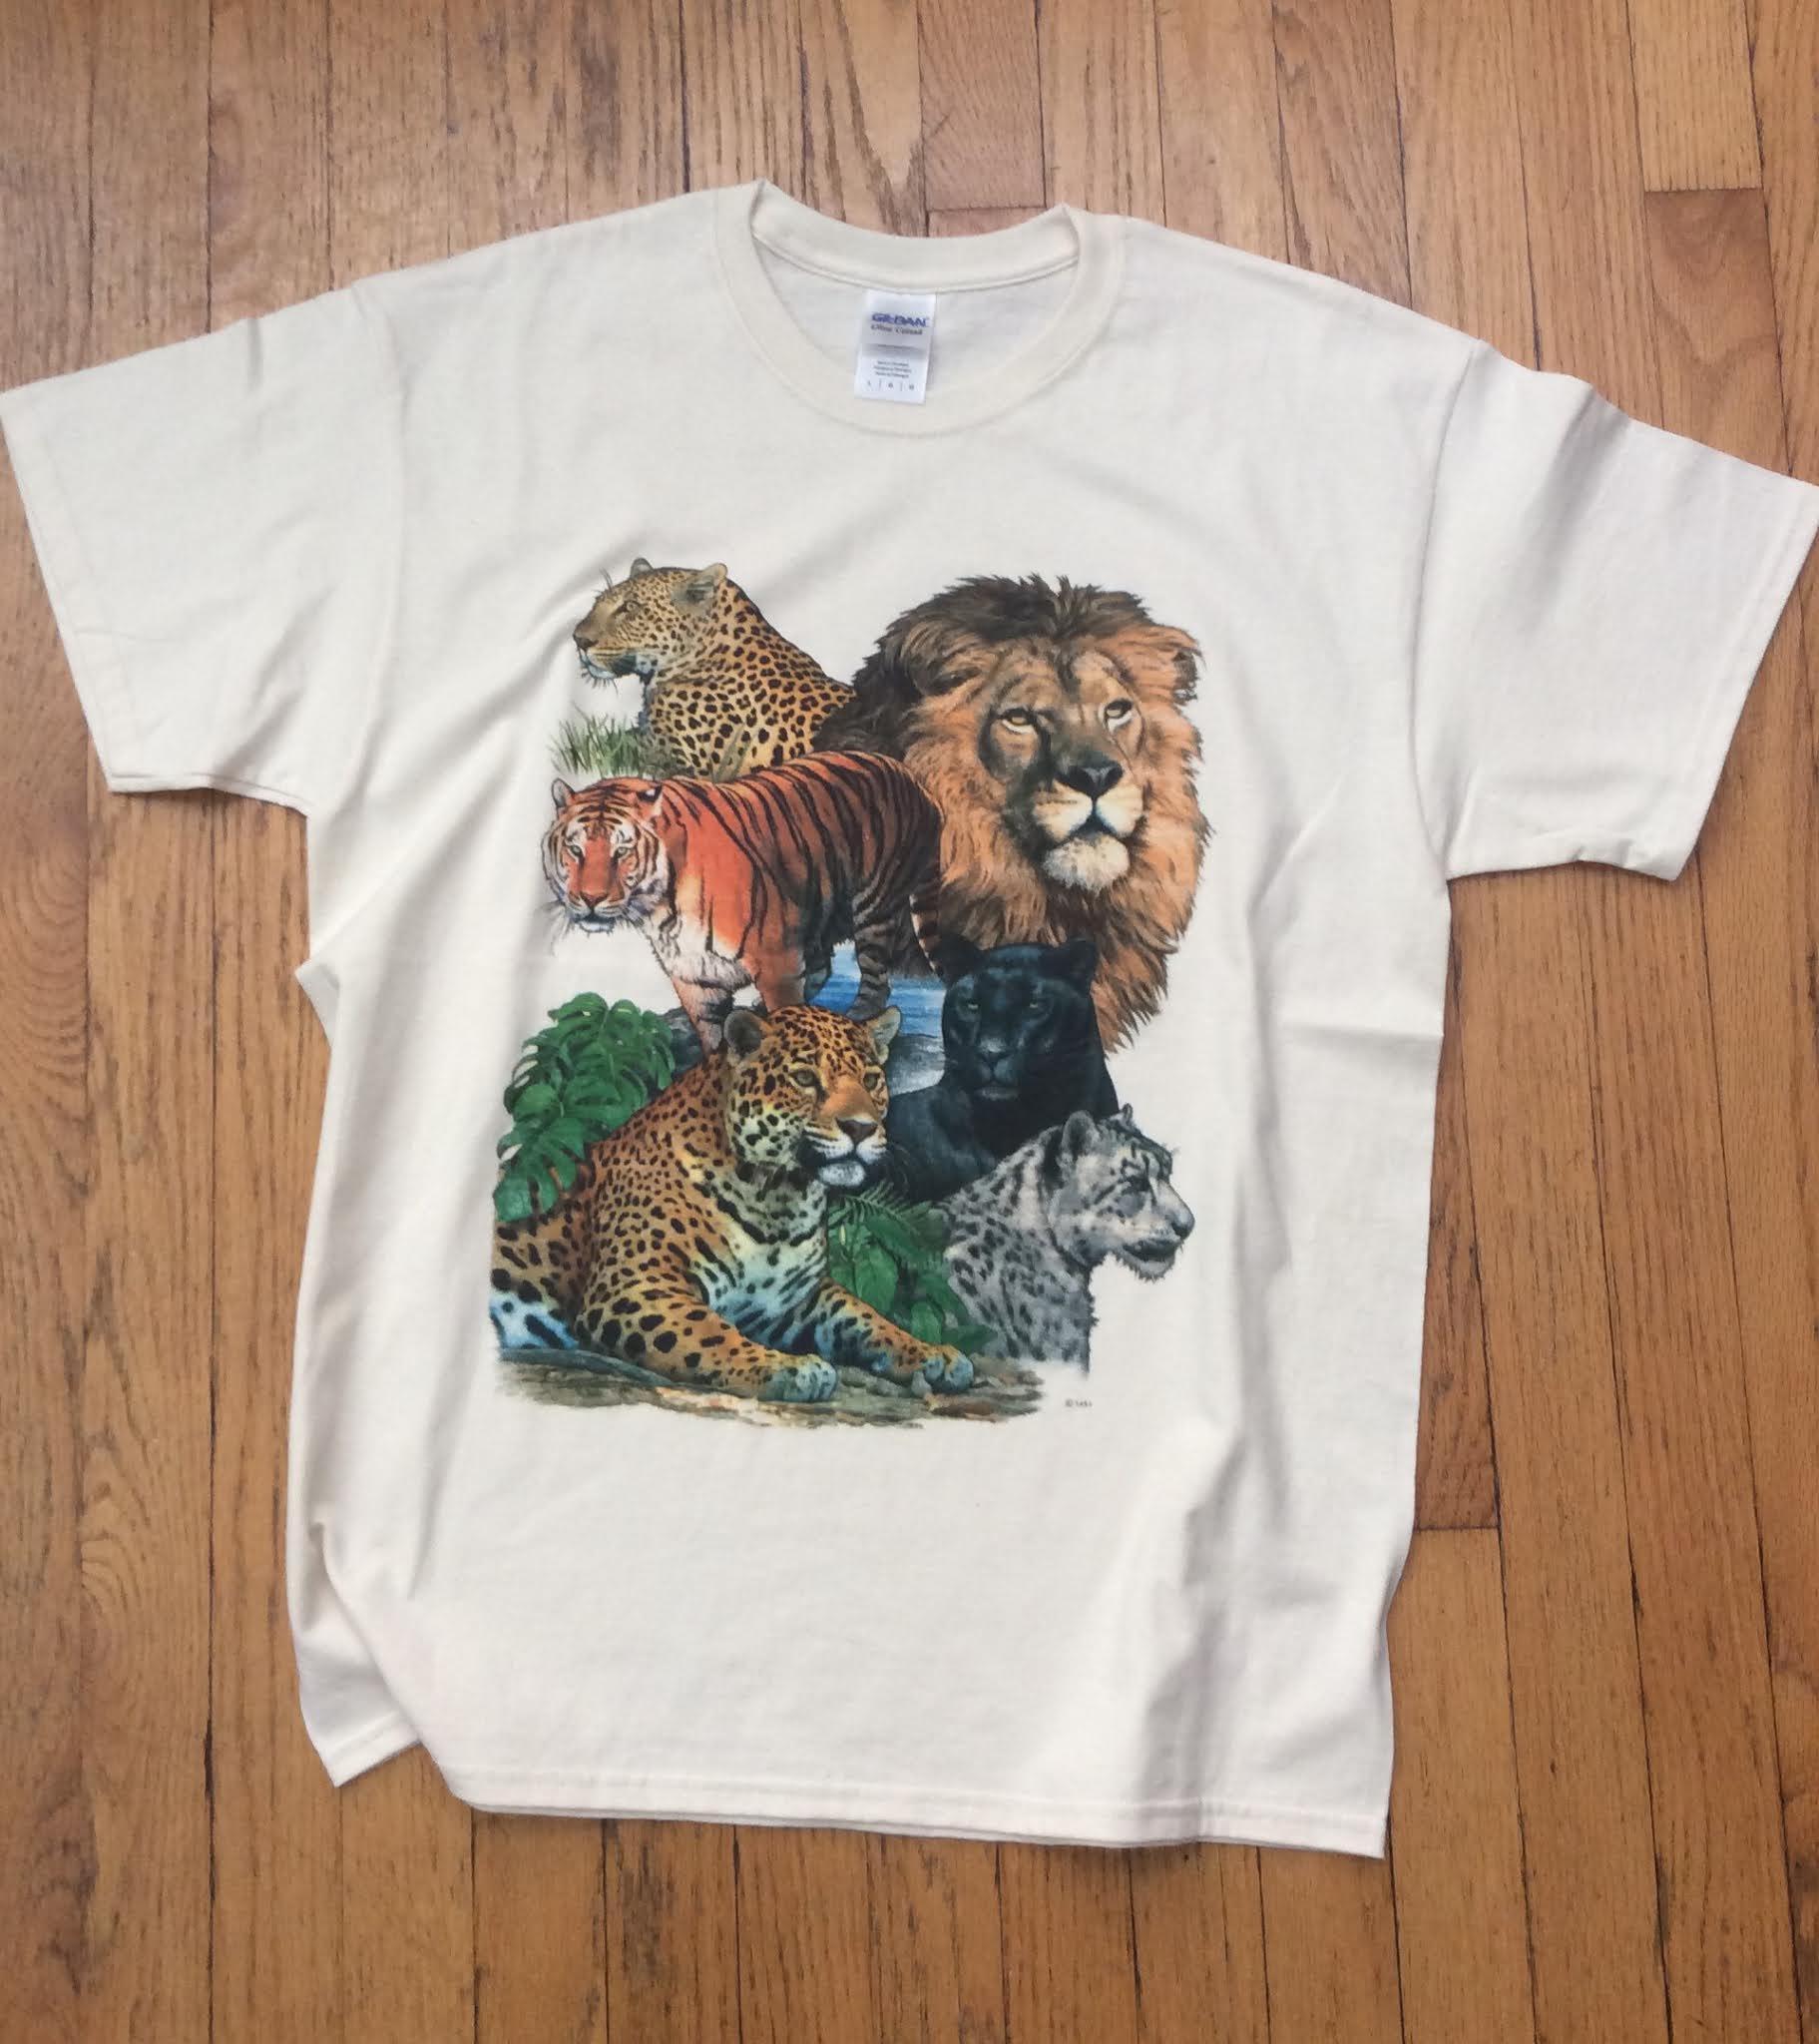 T-SHIRTS CONECTION: GREAT BIG CATS